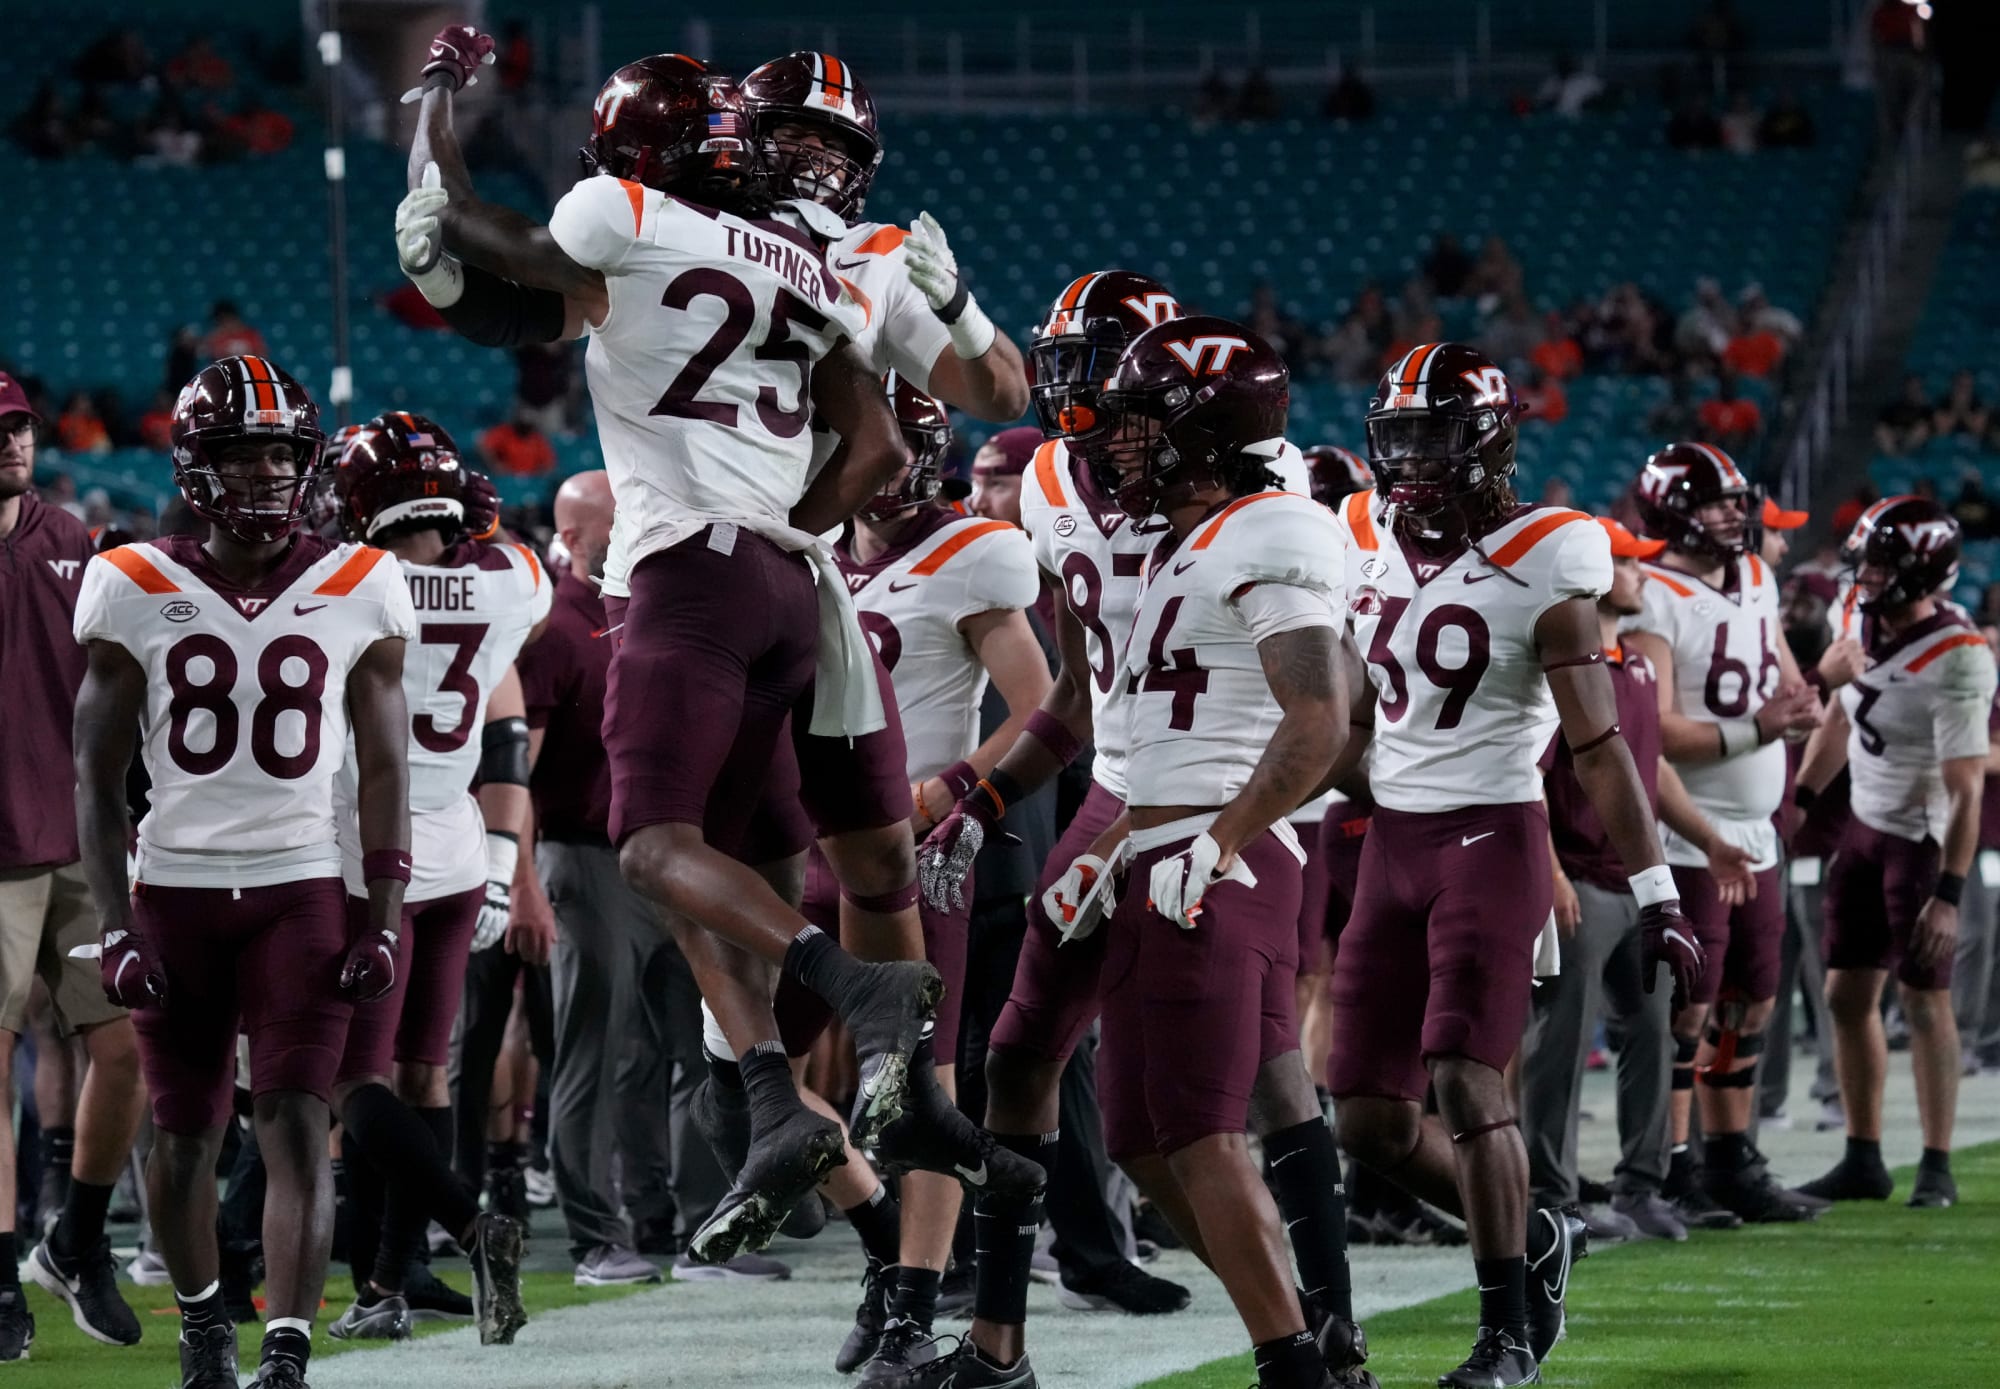 FIVE KEYS TO SUCCESS FOR HOKIE FOOTBALL IN 20222023